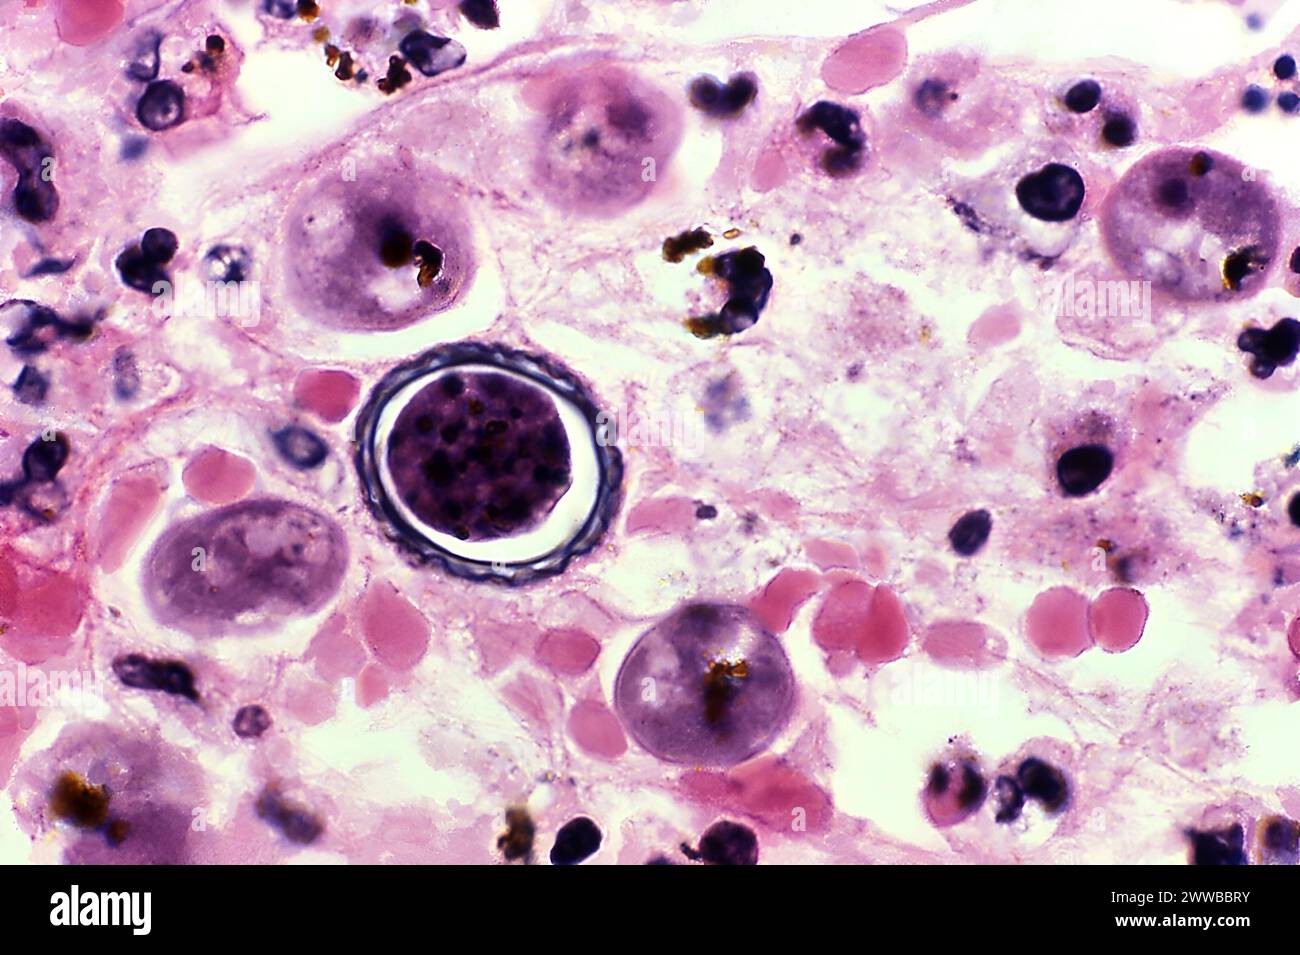 This photomicrograph depicted a view of brain tissue in which an Acanthamoeba sp. cyst. CDC/DPDx George Healy, Ph.D. 1977. Stock Photo